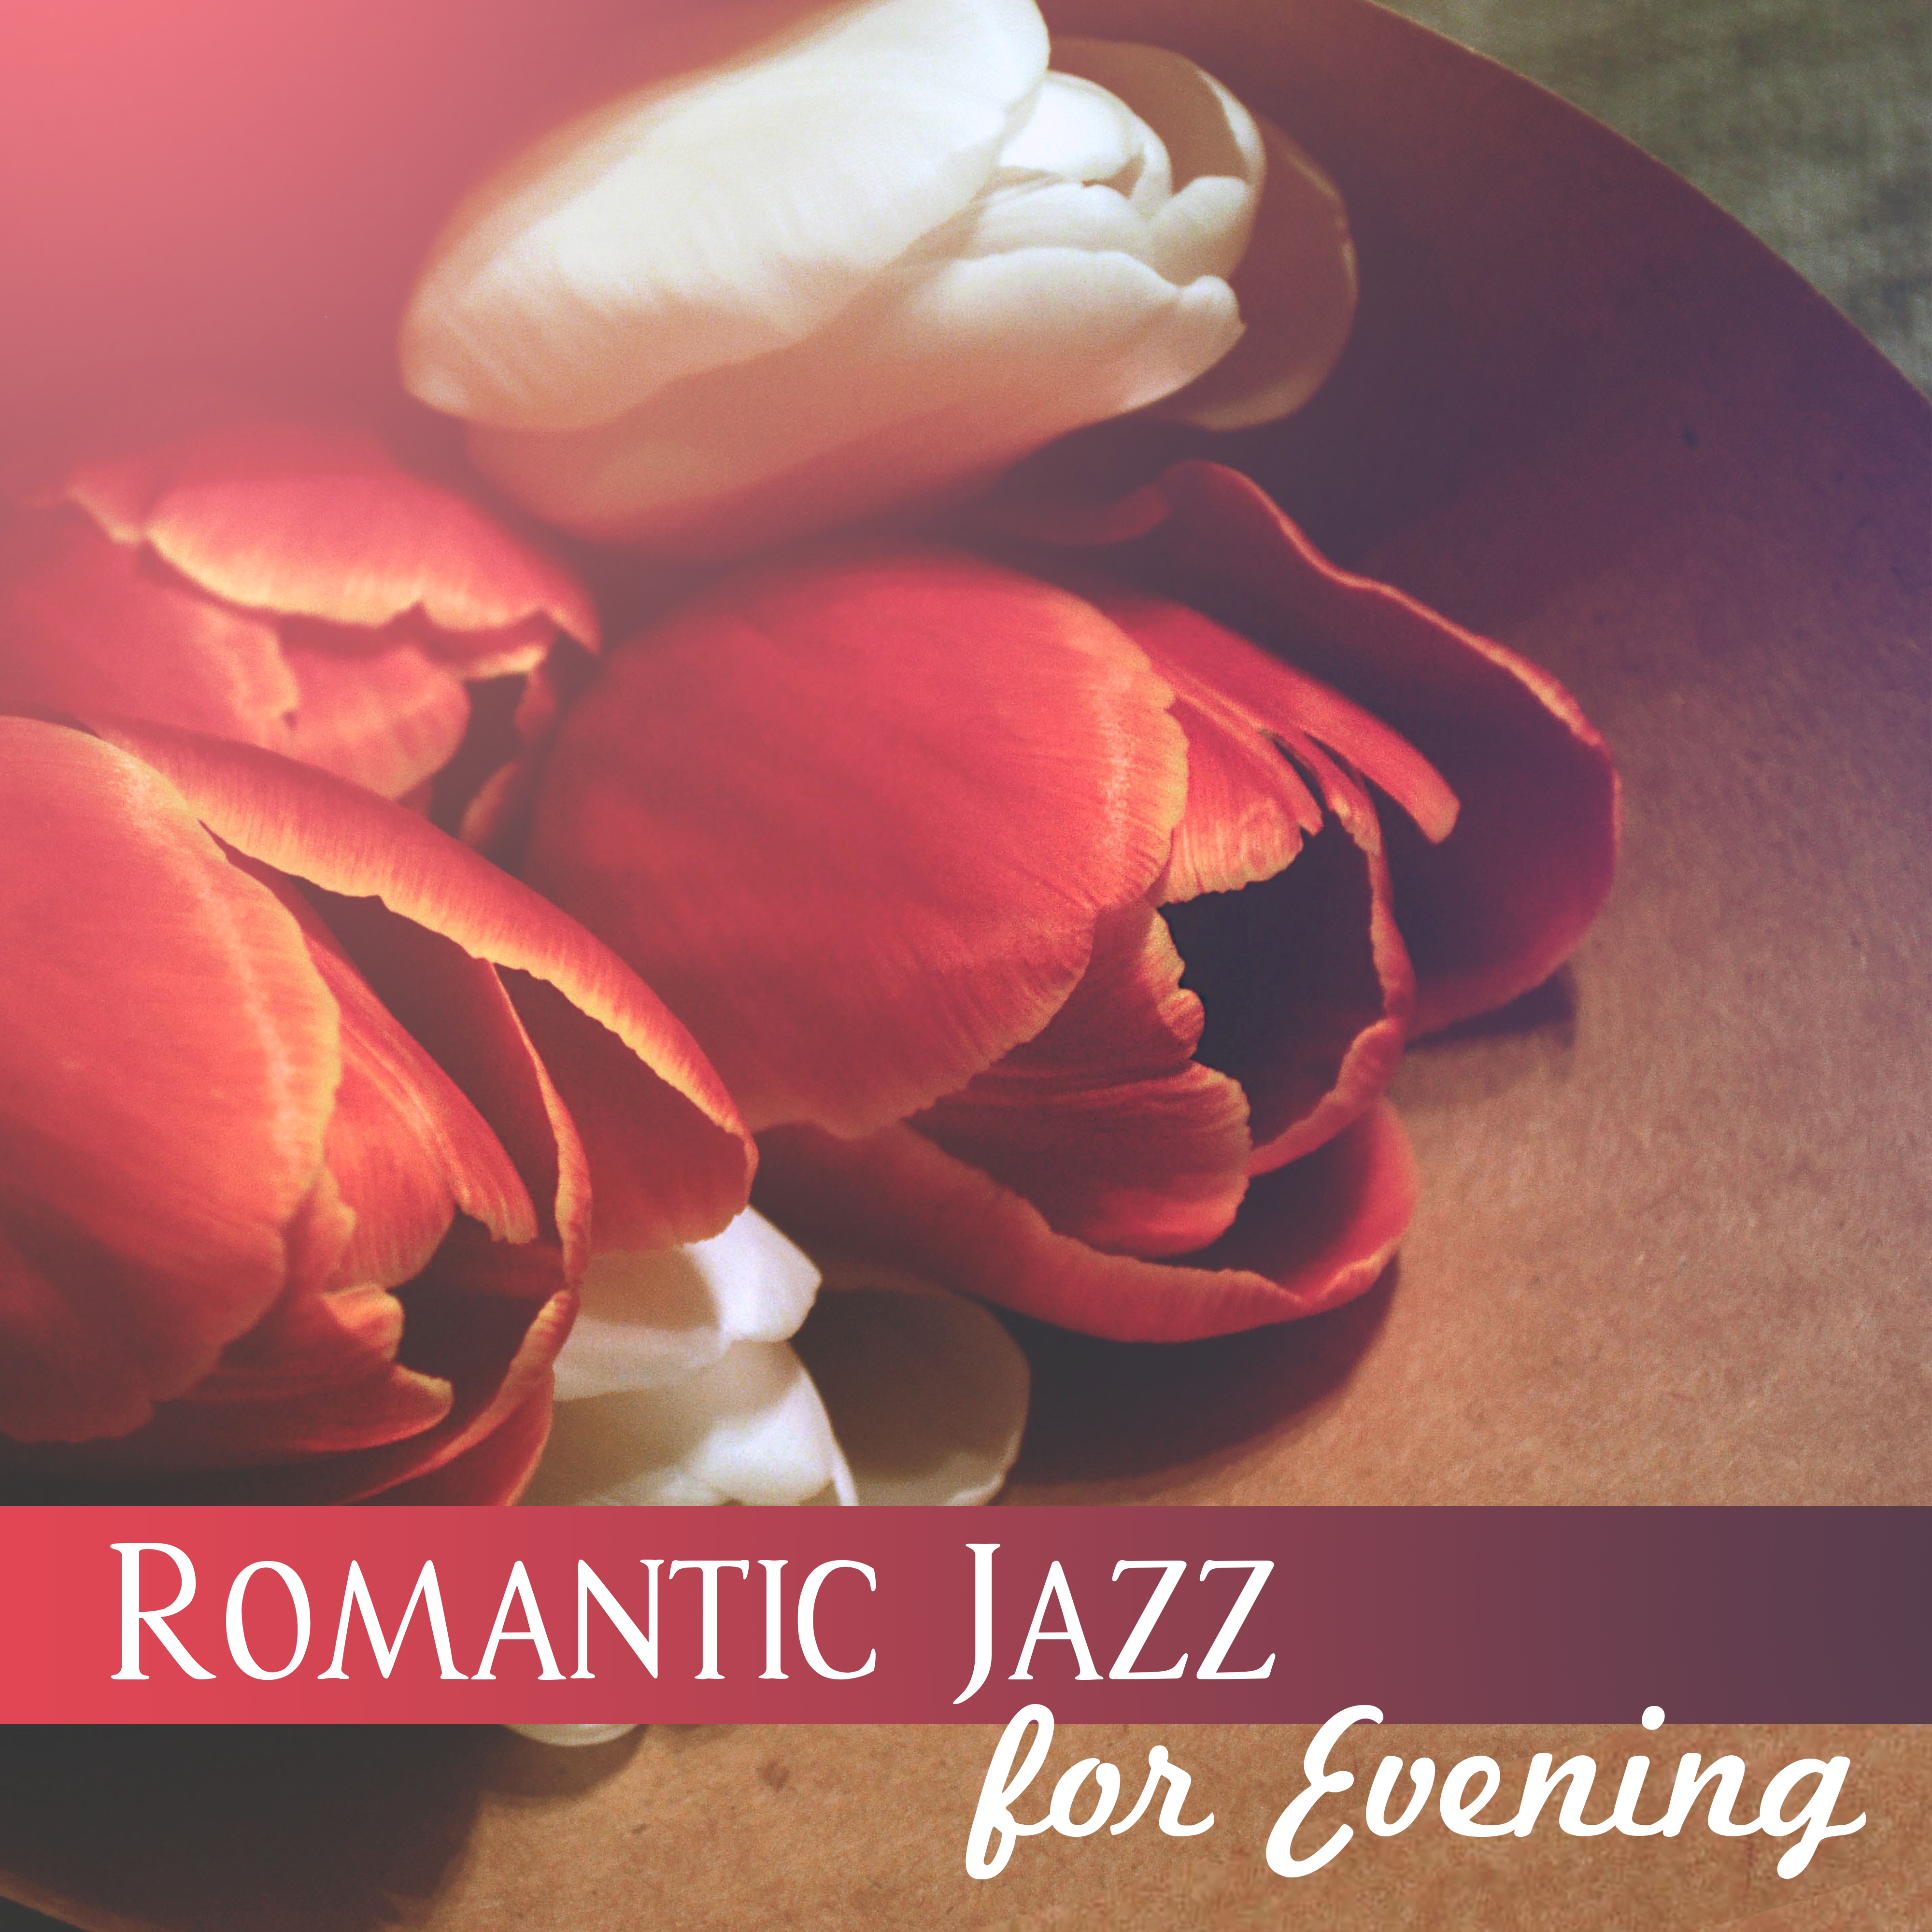 Romantic Jazz for Evening  Easy Listening, Erotic Jazz Melodies, Smooth Sounds for Date, Evening Music for Lovers